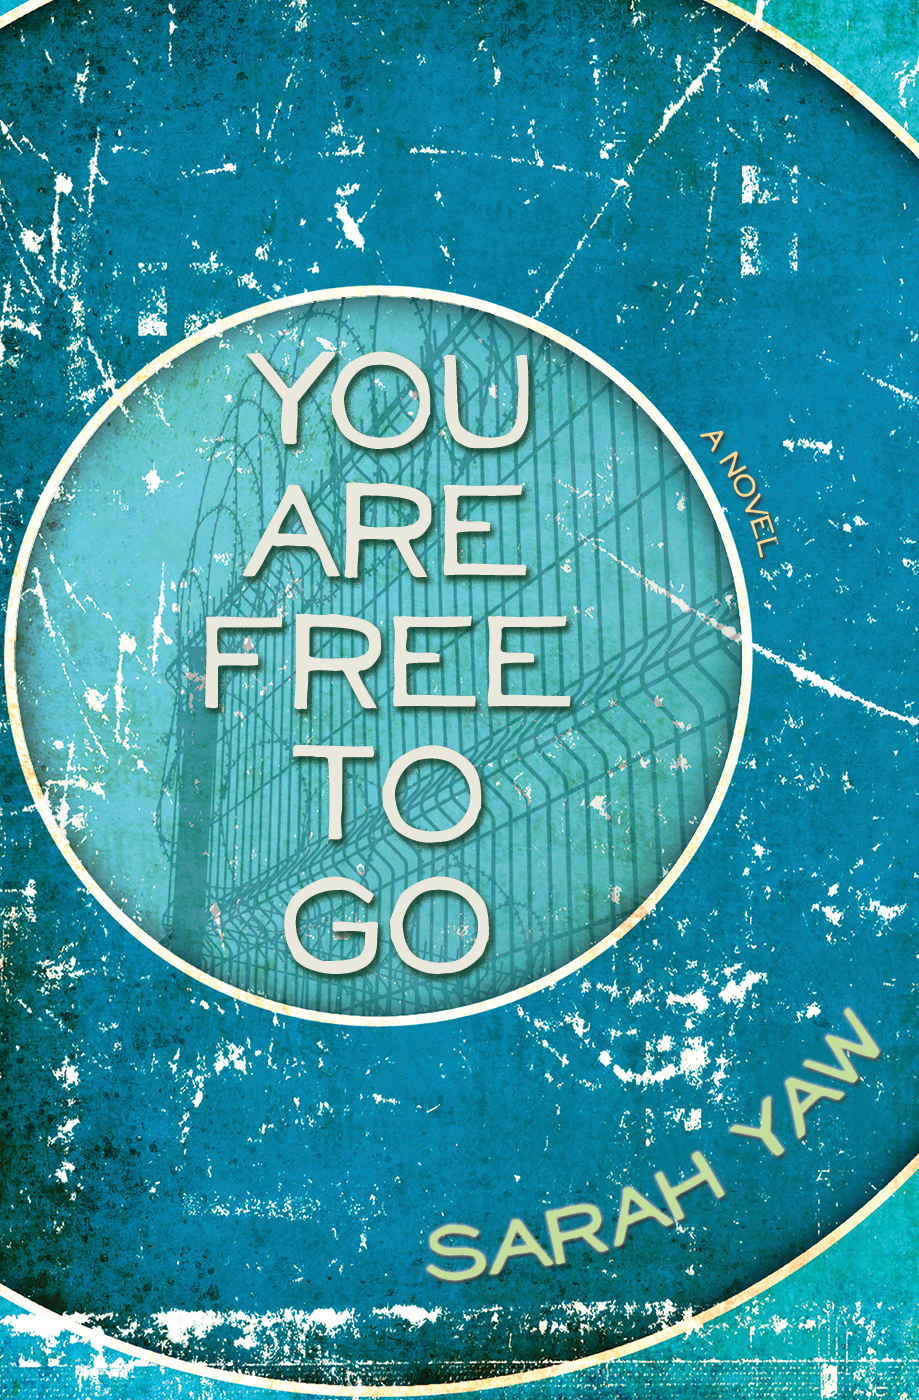 You Are Free to Go: a novel by Sarah Yaw. Winner of the 2013 Engine Books Novel Prize